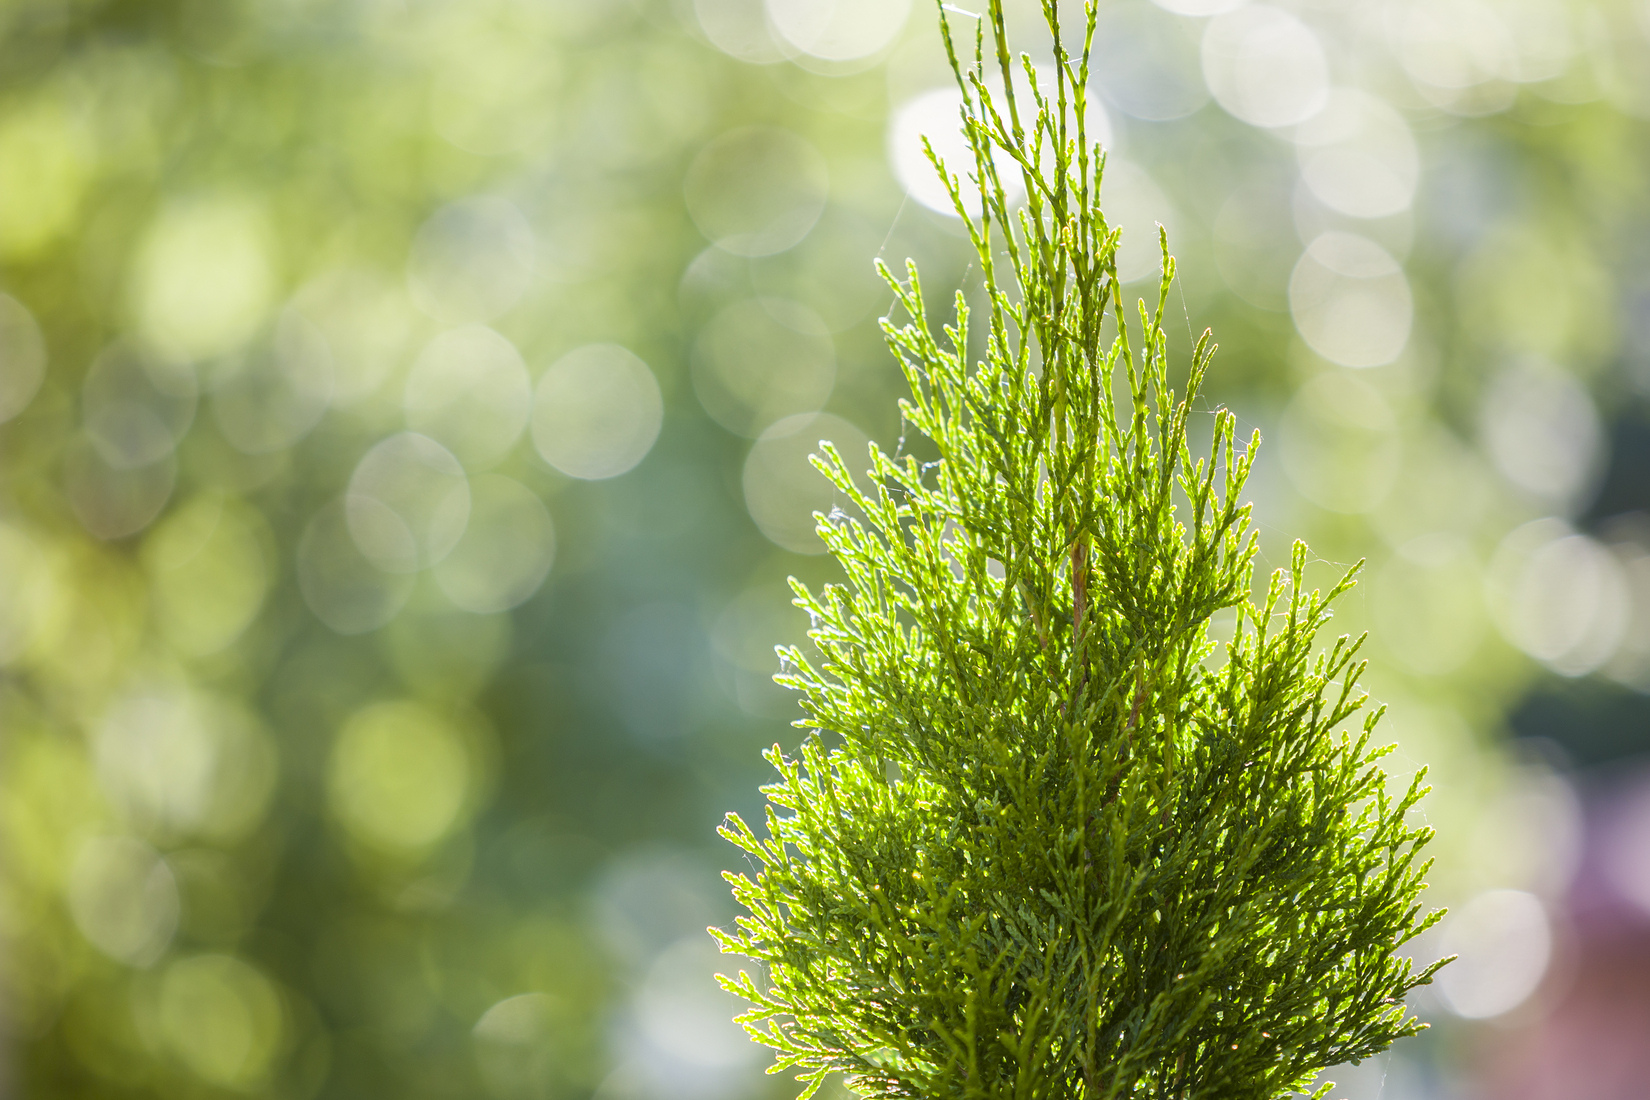 “Elite” trees absorb more carbon dioxide by growing faster